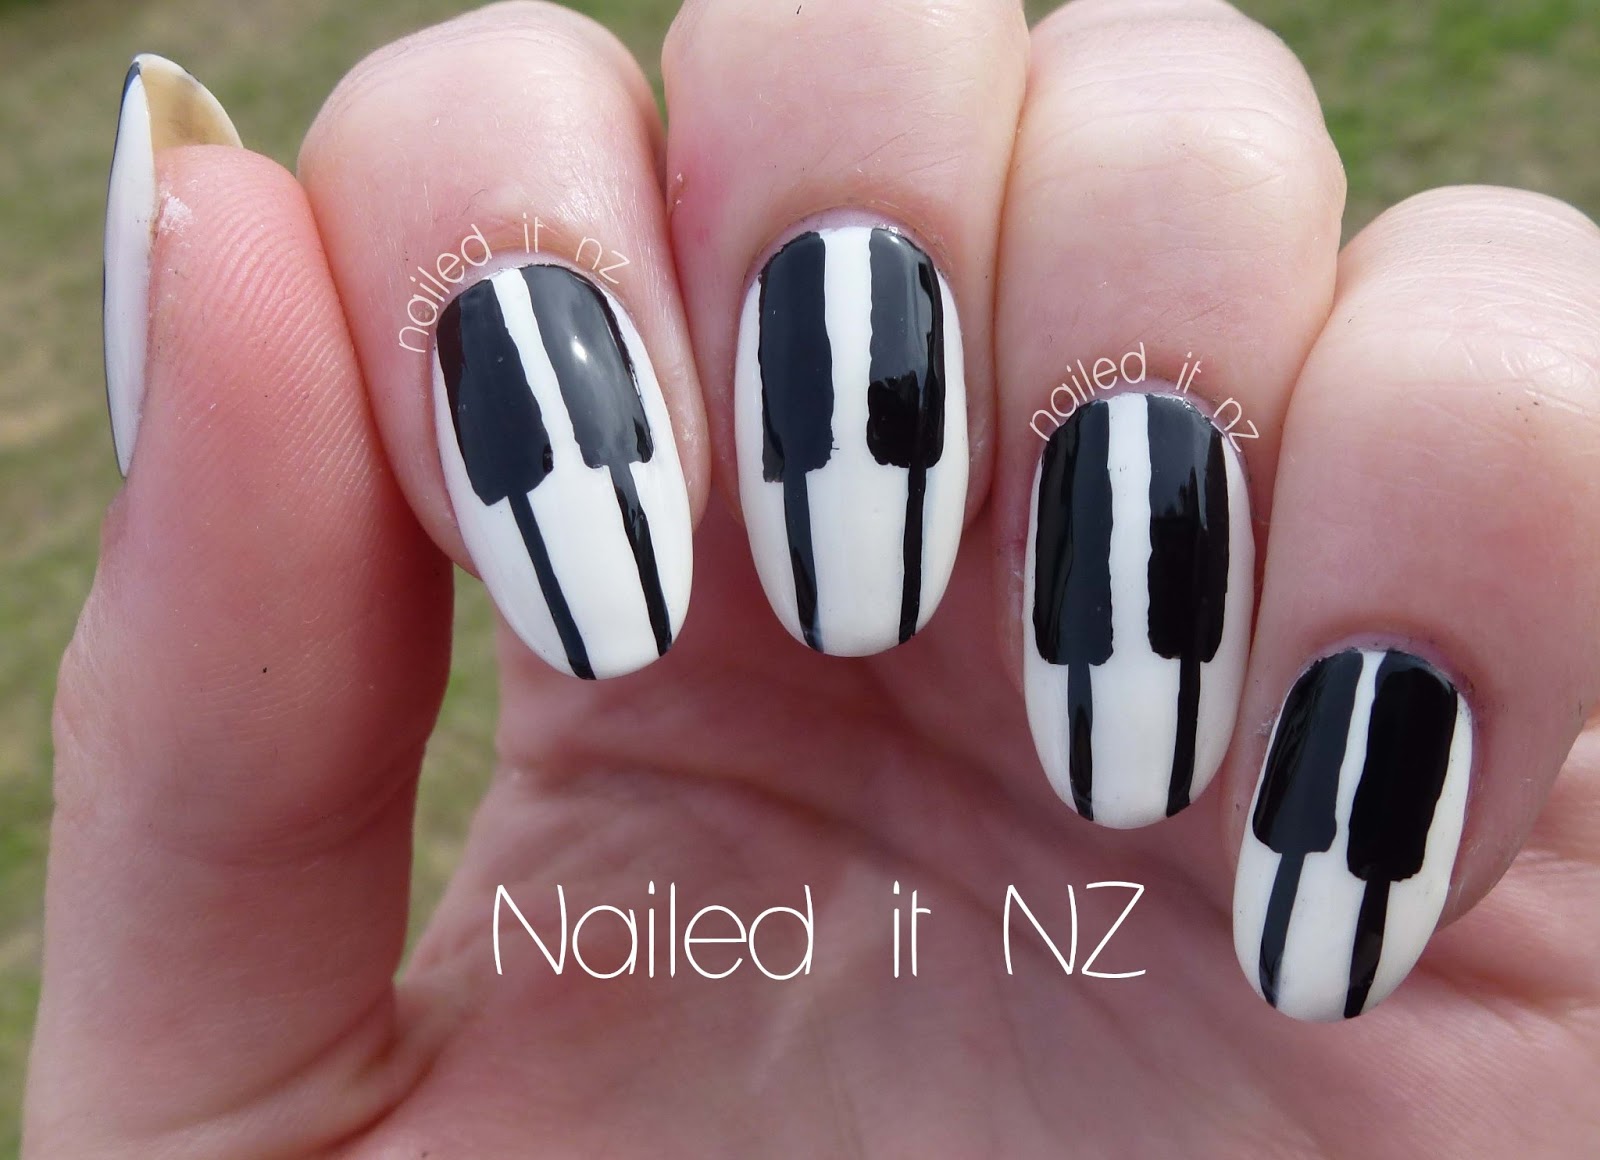 3. Black and White Piano Key Nails - wide 1